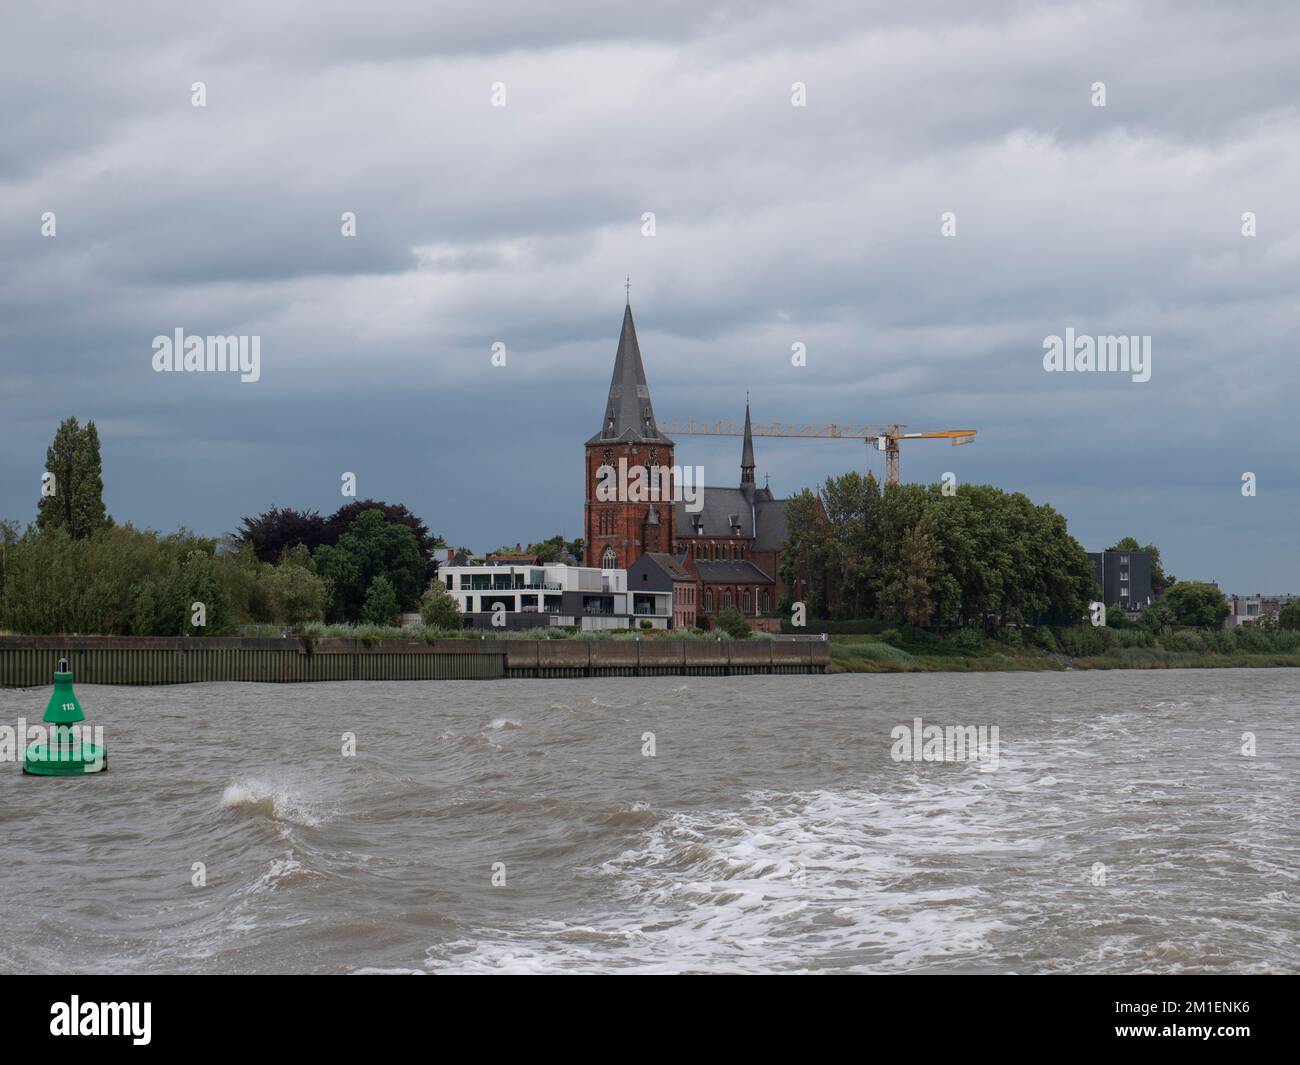 The Sint Martinus Church from the river Scheldt in Zwijndrecht, Belgium on a cloudy day Stock Photo